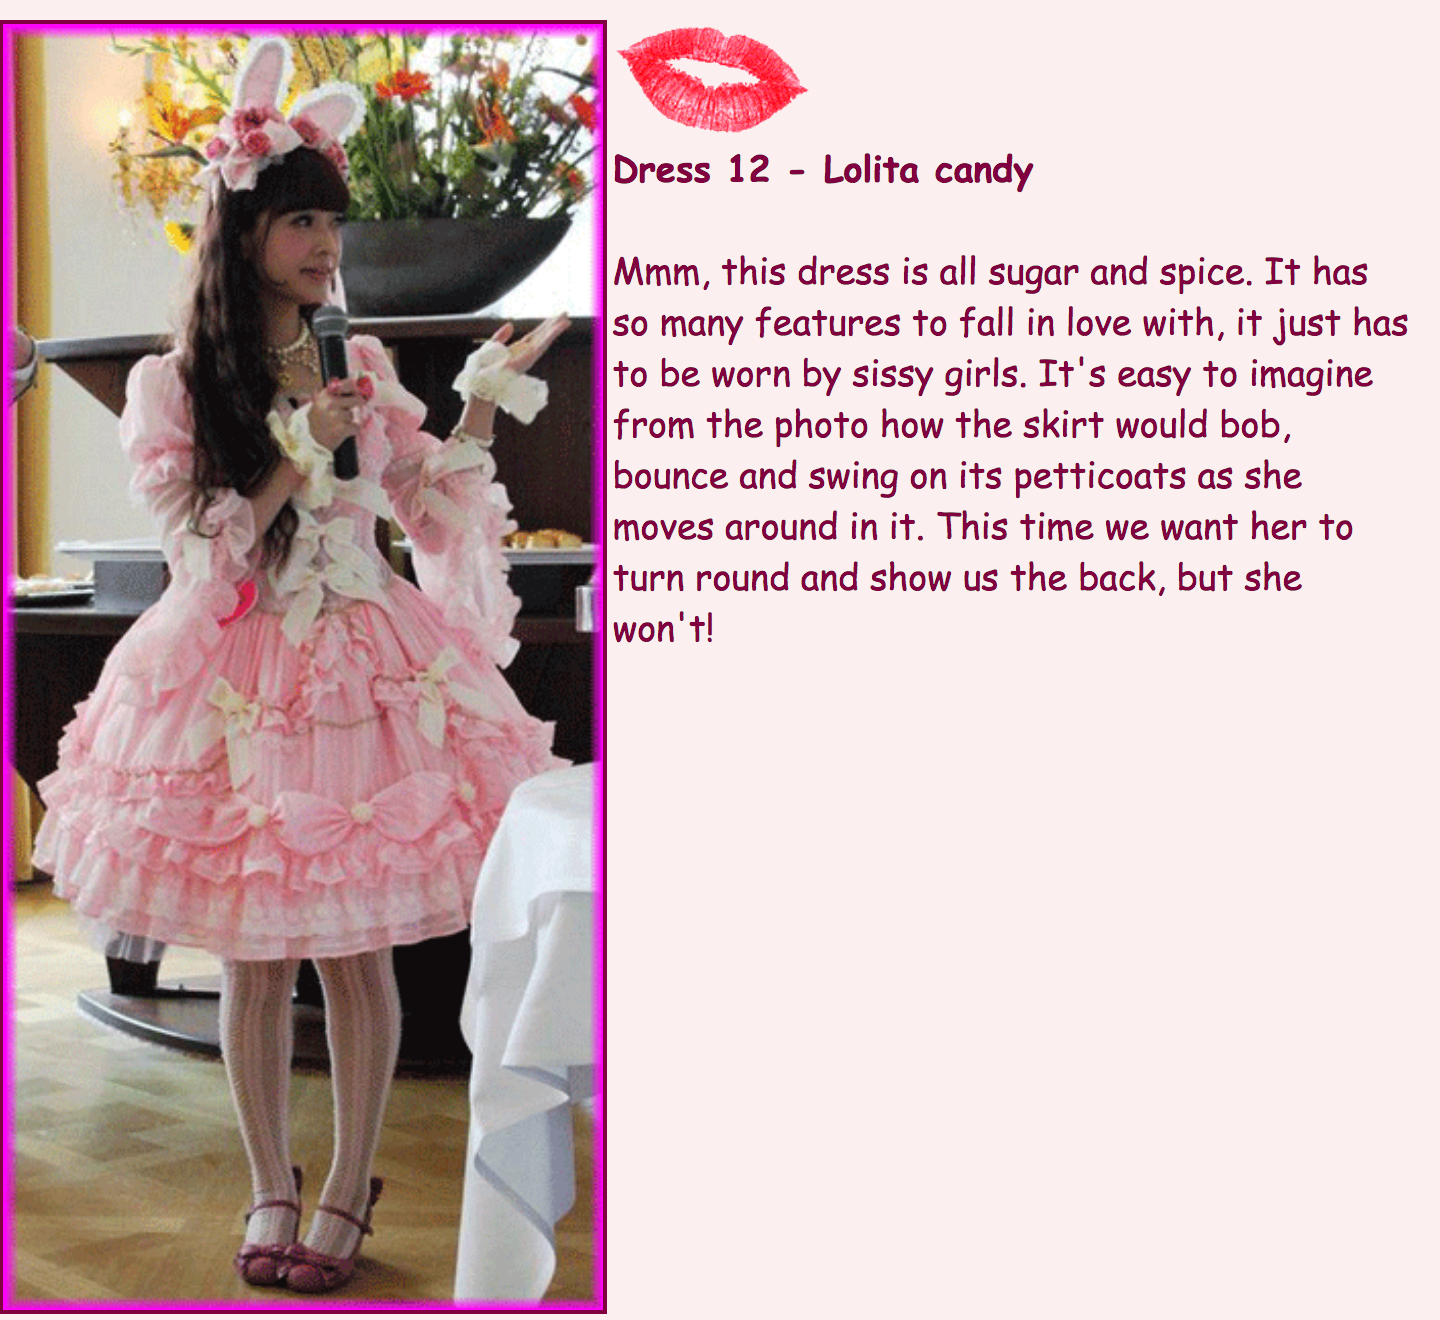 /snow/ - Sissies, Fetishists, and Creeps in Lolita
